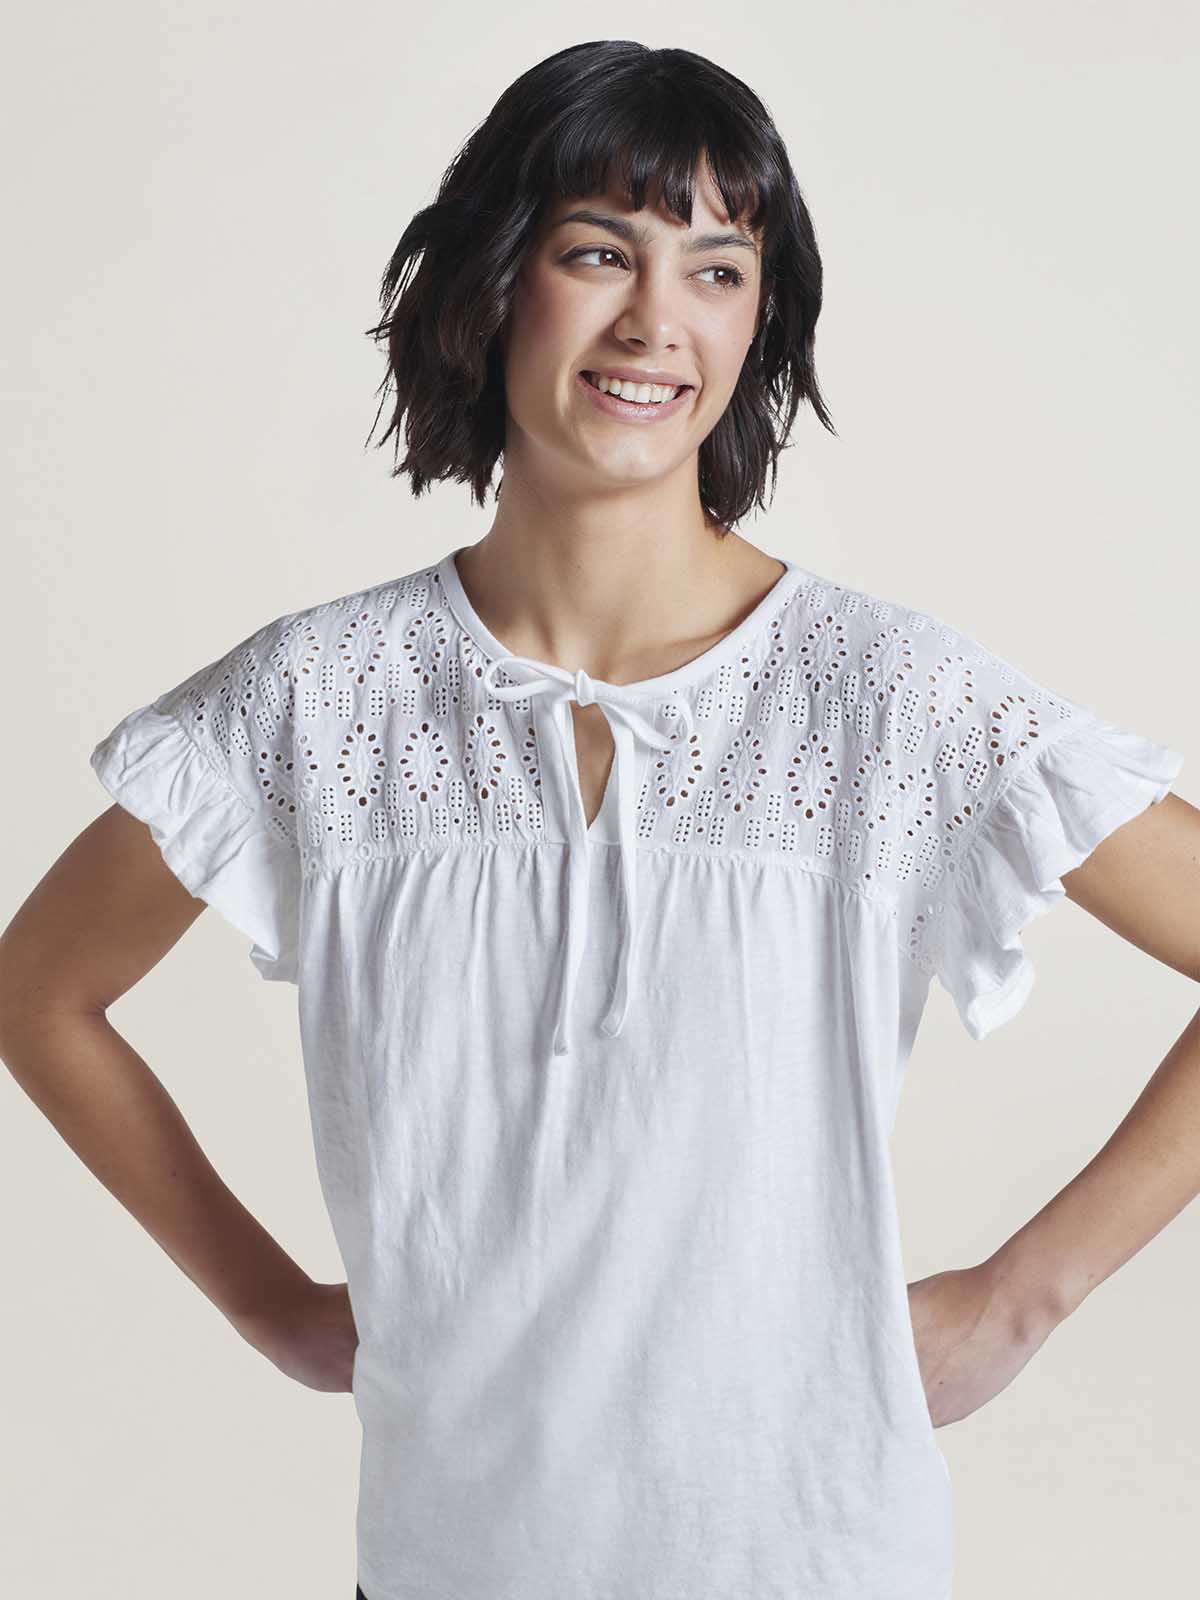 Lucky Brand 100% Cotton embroidered top